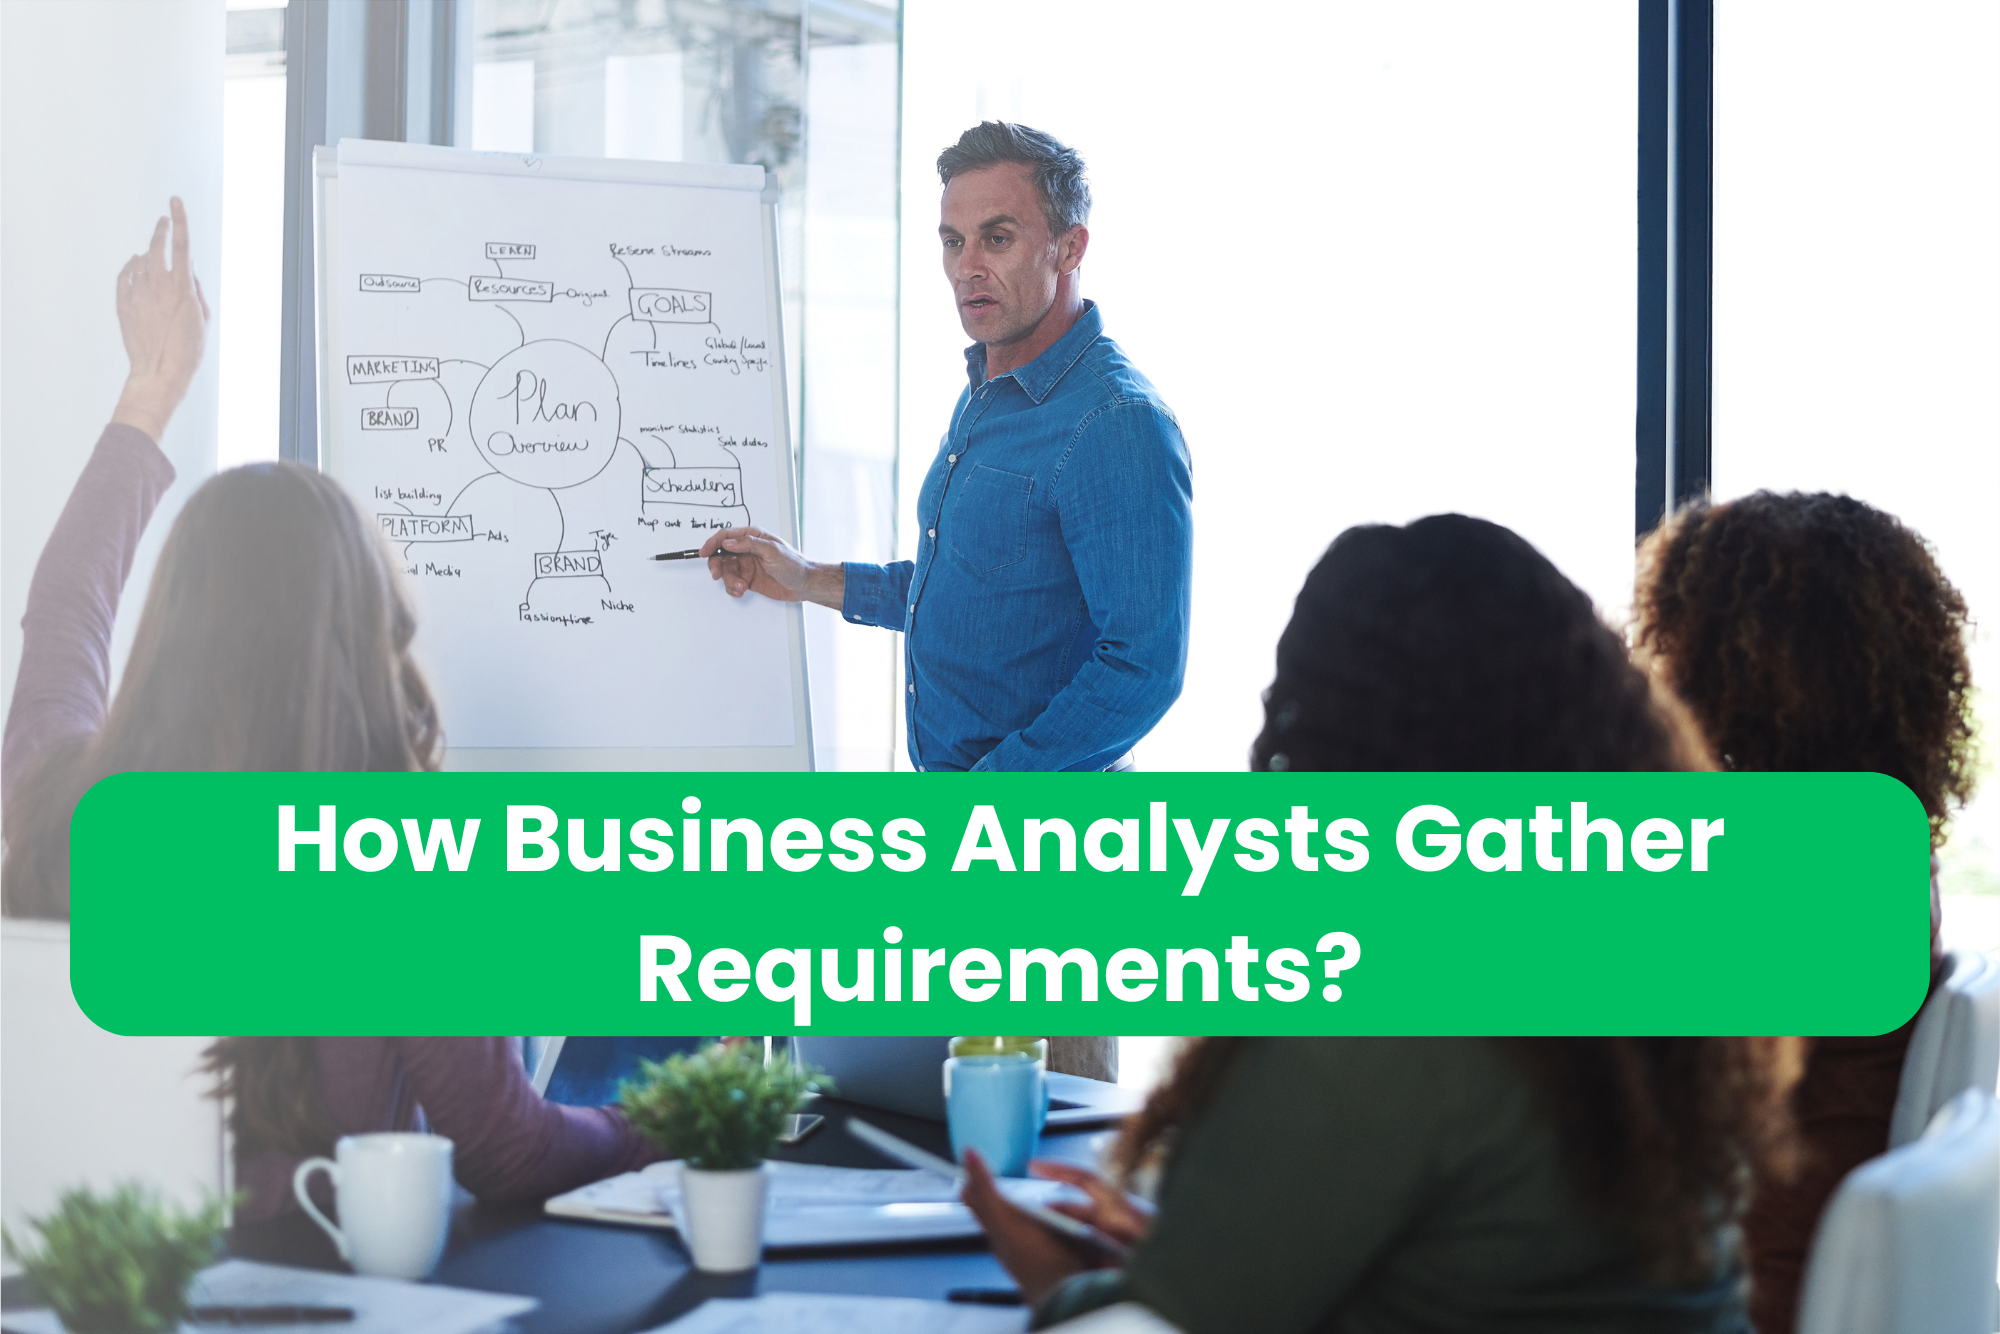 How Business Analysts Gather Requirements?